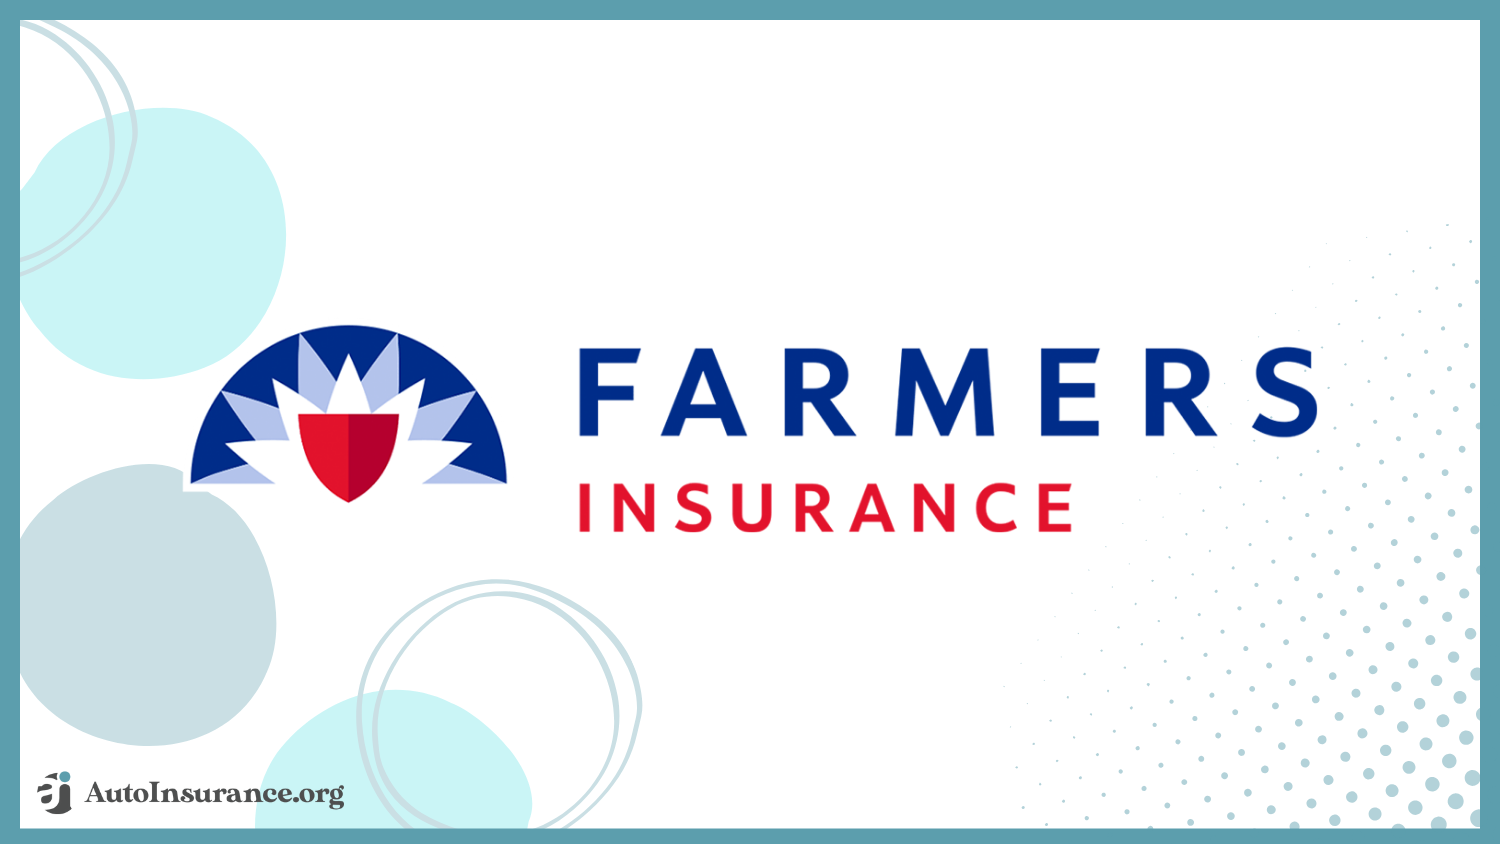 Farmers: Best Auto Insurance for Military Families and Veterans